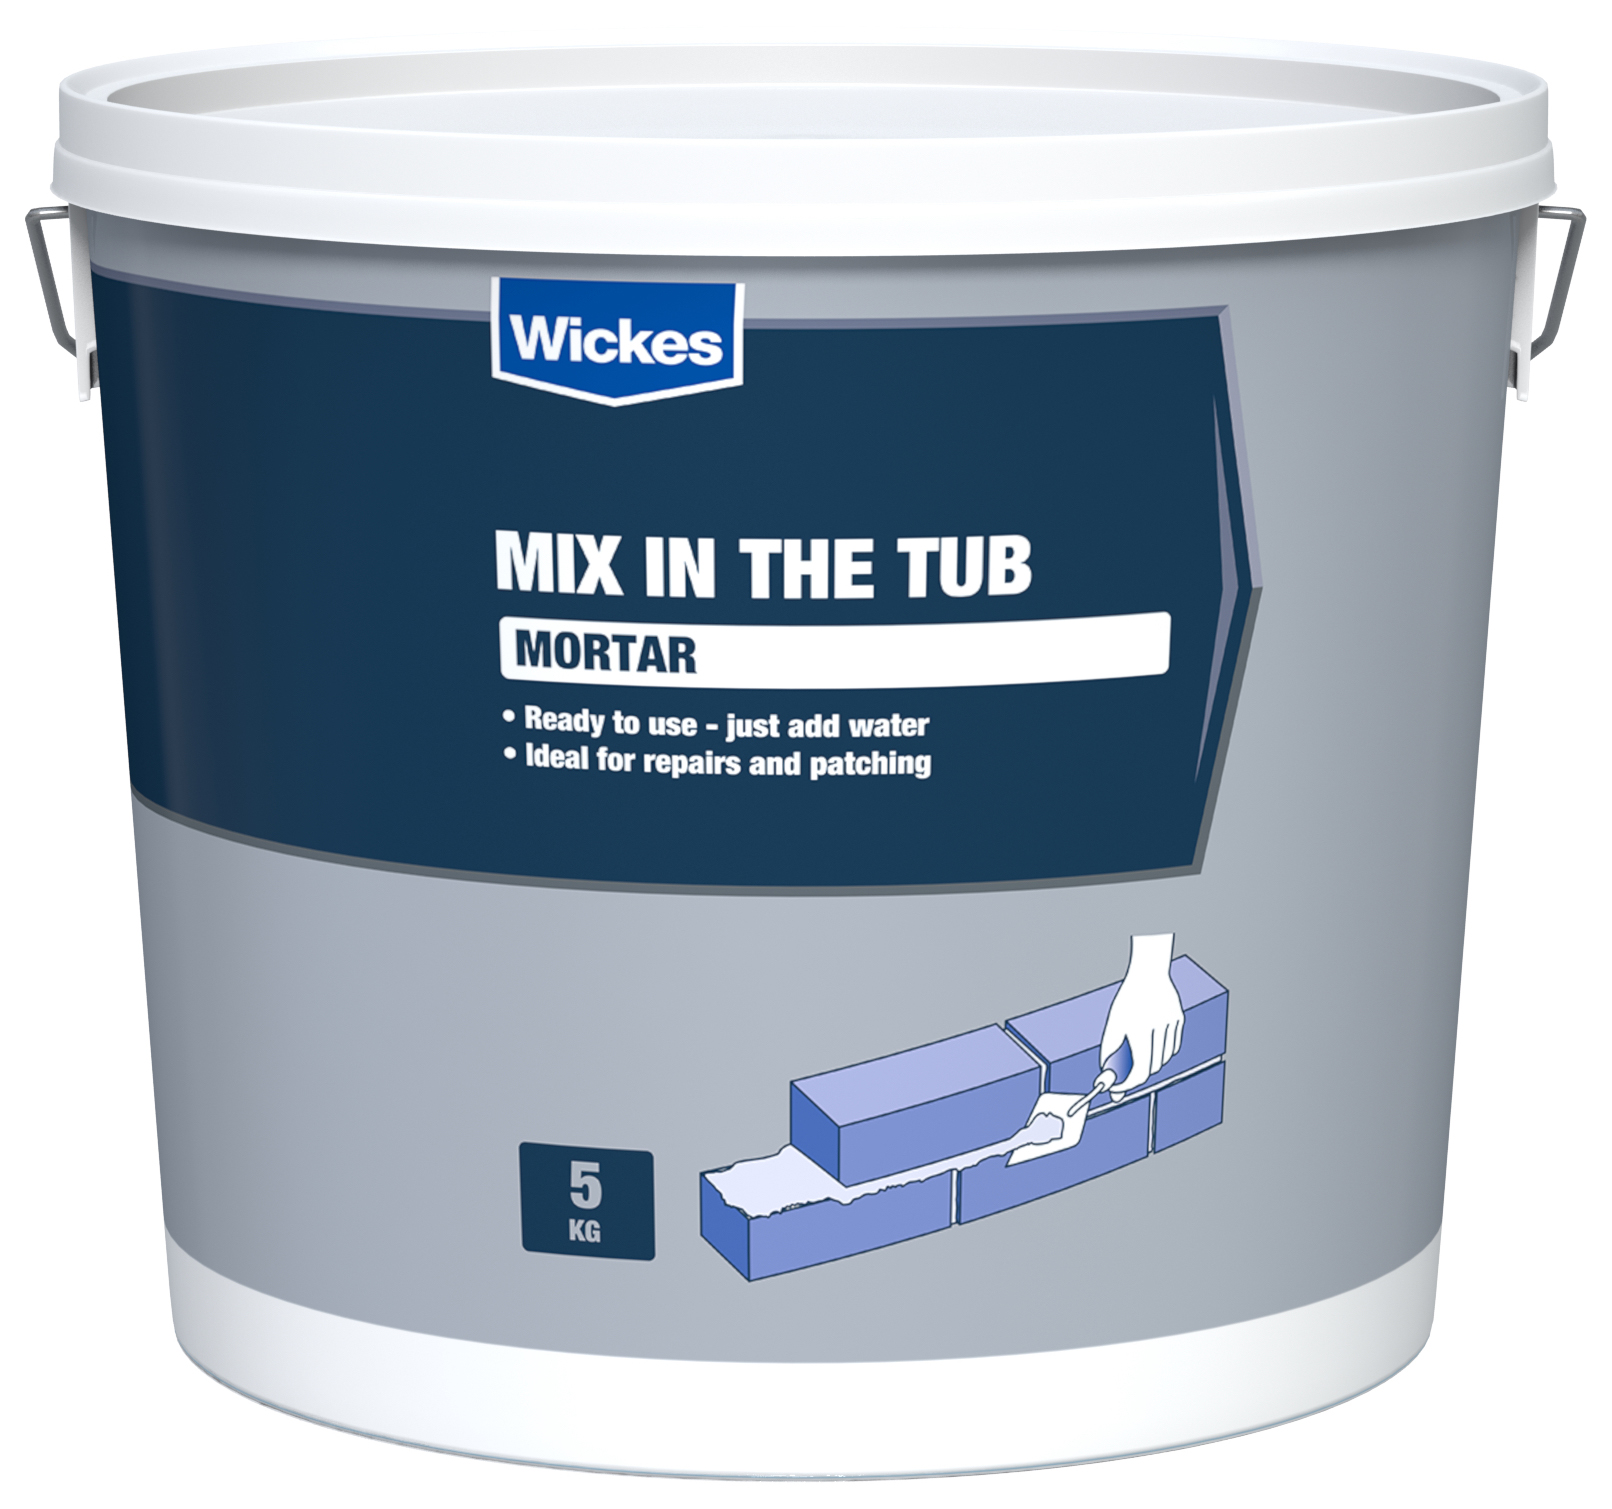 Image of Wickes Mix in the Tub Mortar Mix - 5kg